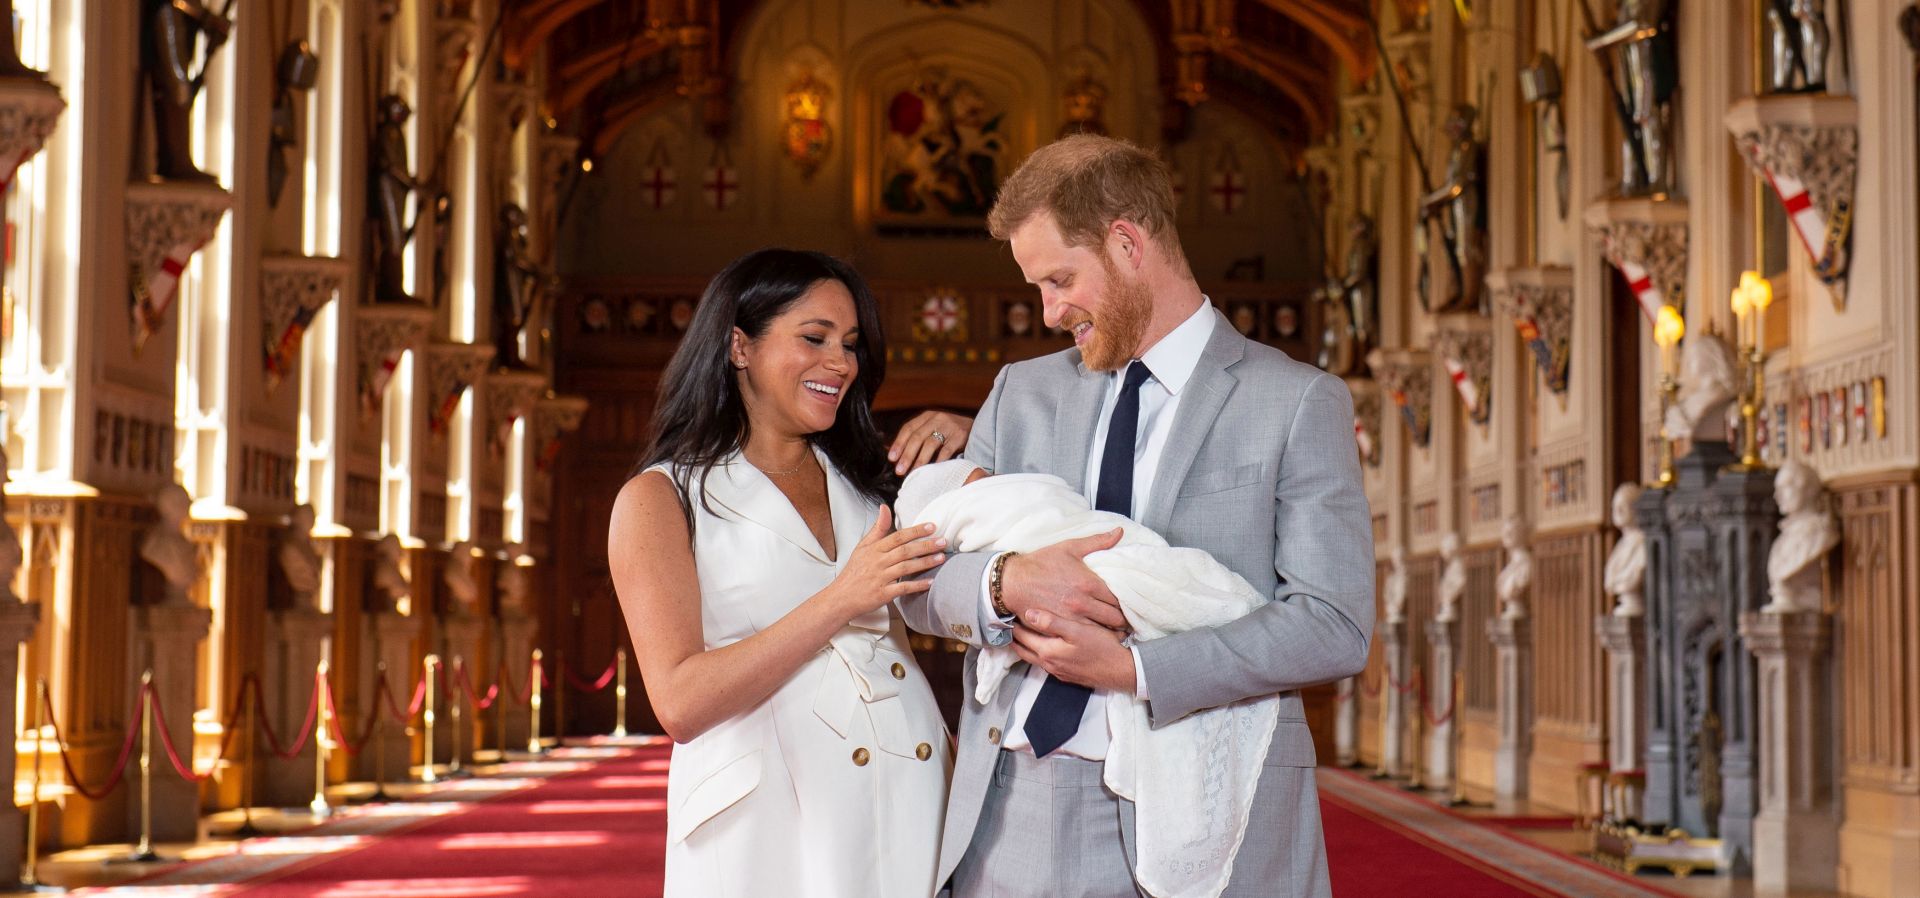 epa07555431 Prince Harry (R) and Meghan, the Duchess of Sussex pose together with their newborn son in Winsdor, Britain, 08 May 2019. It is the first child of Prince Harry and his wife Meghan.  EPA/Domic Lipinski / PA   EDITORIAL USE ONLY/NO SALES